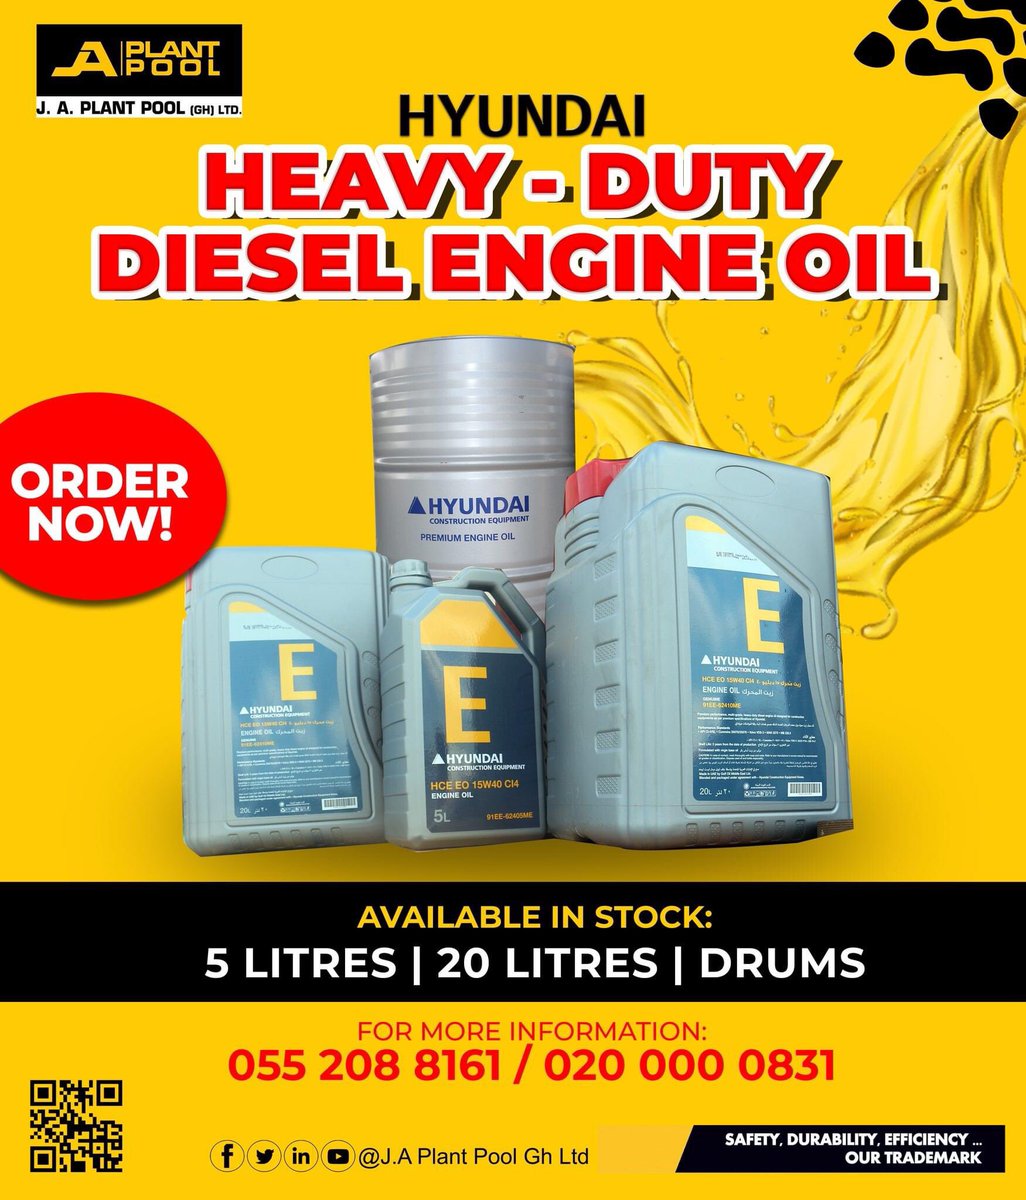 Experience the power of smooth rides with our high-grade lubricants! From heavy-duty machines to cars, trust @JAPPGH for superior performance. For inquiries, email sales@japlantpoolgh.com or call +23320 000 0831. Elevate your machinery with the #LubricationExperts! #jappgh